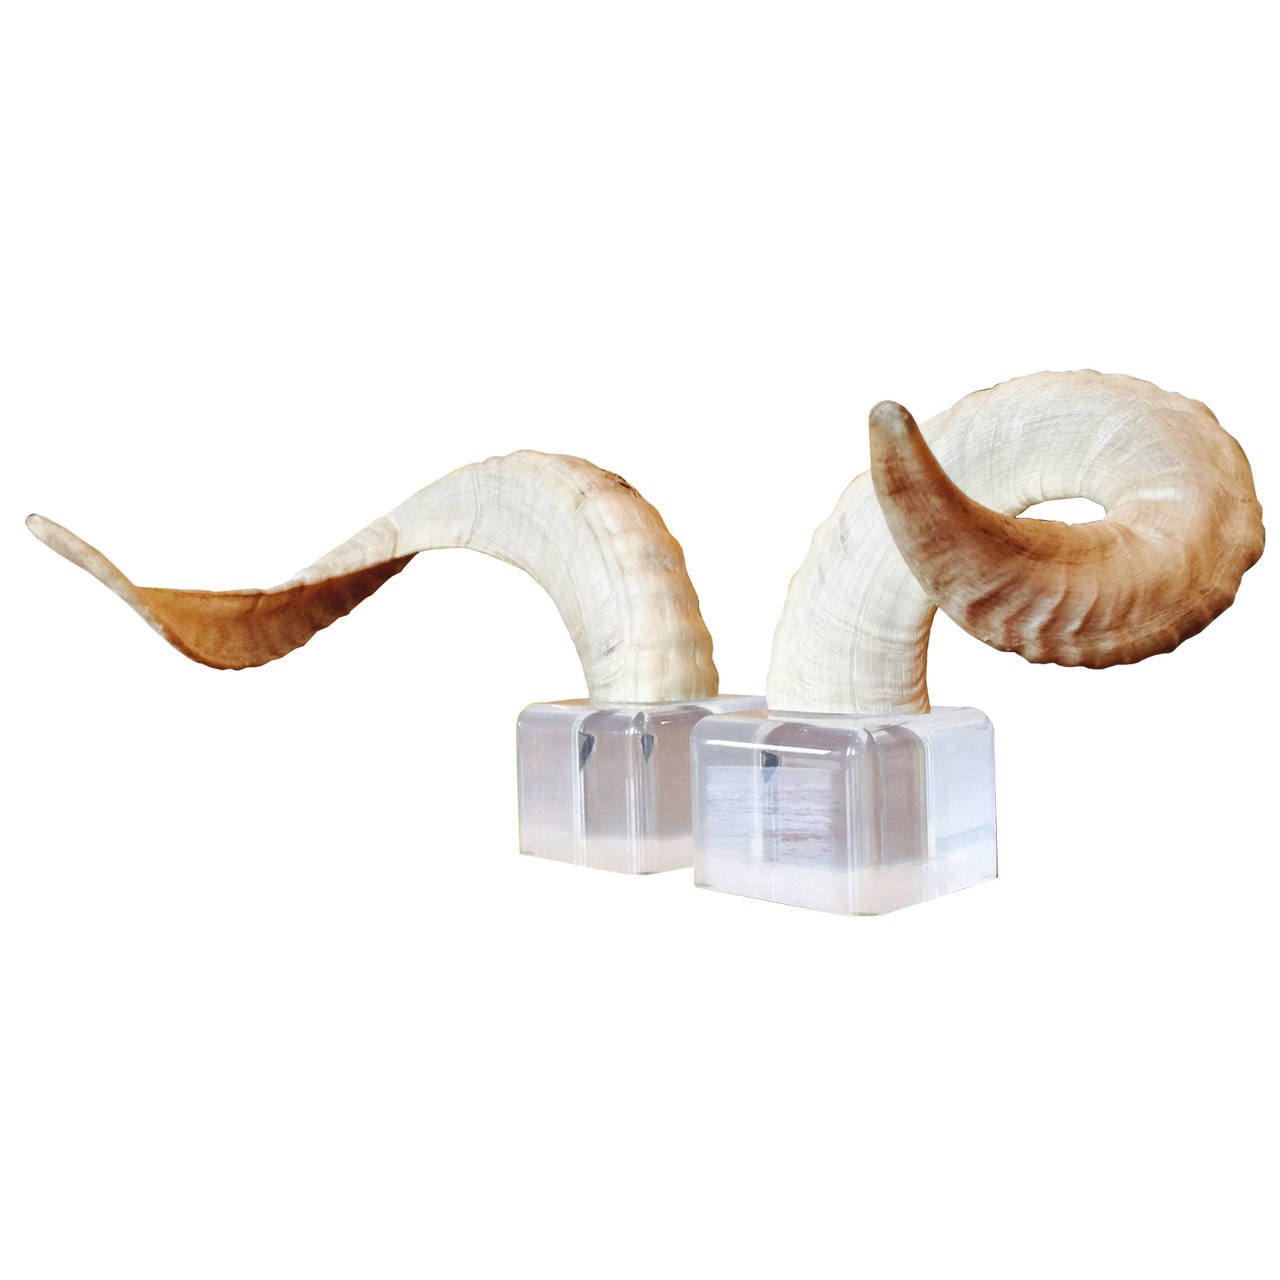 Pair of ram horns on lucite bases. 

dimensions: 19.5